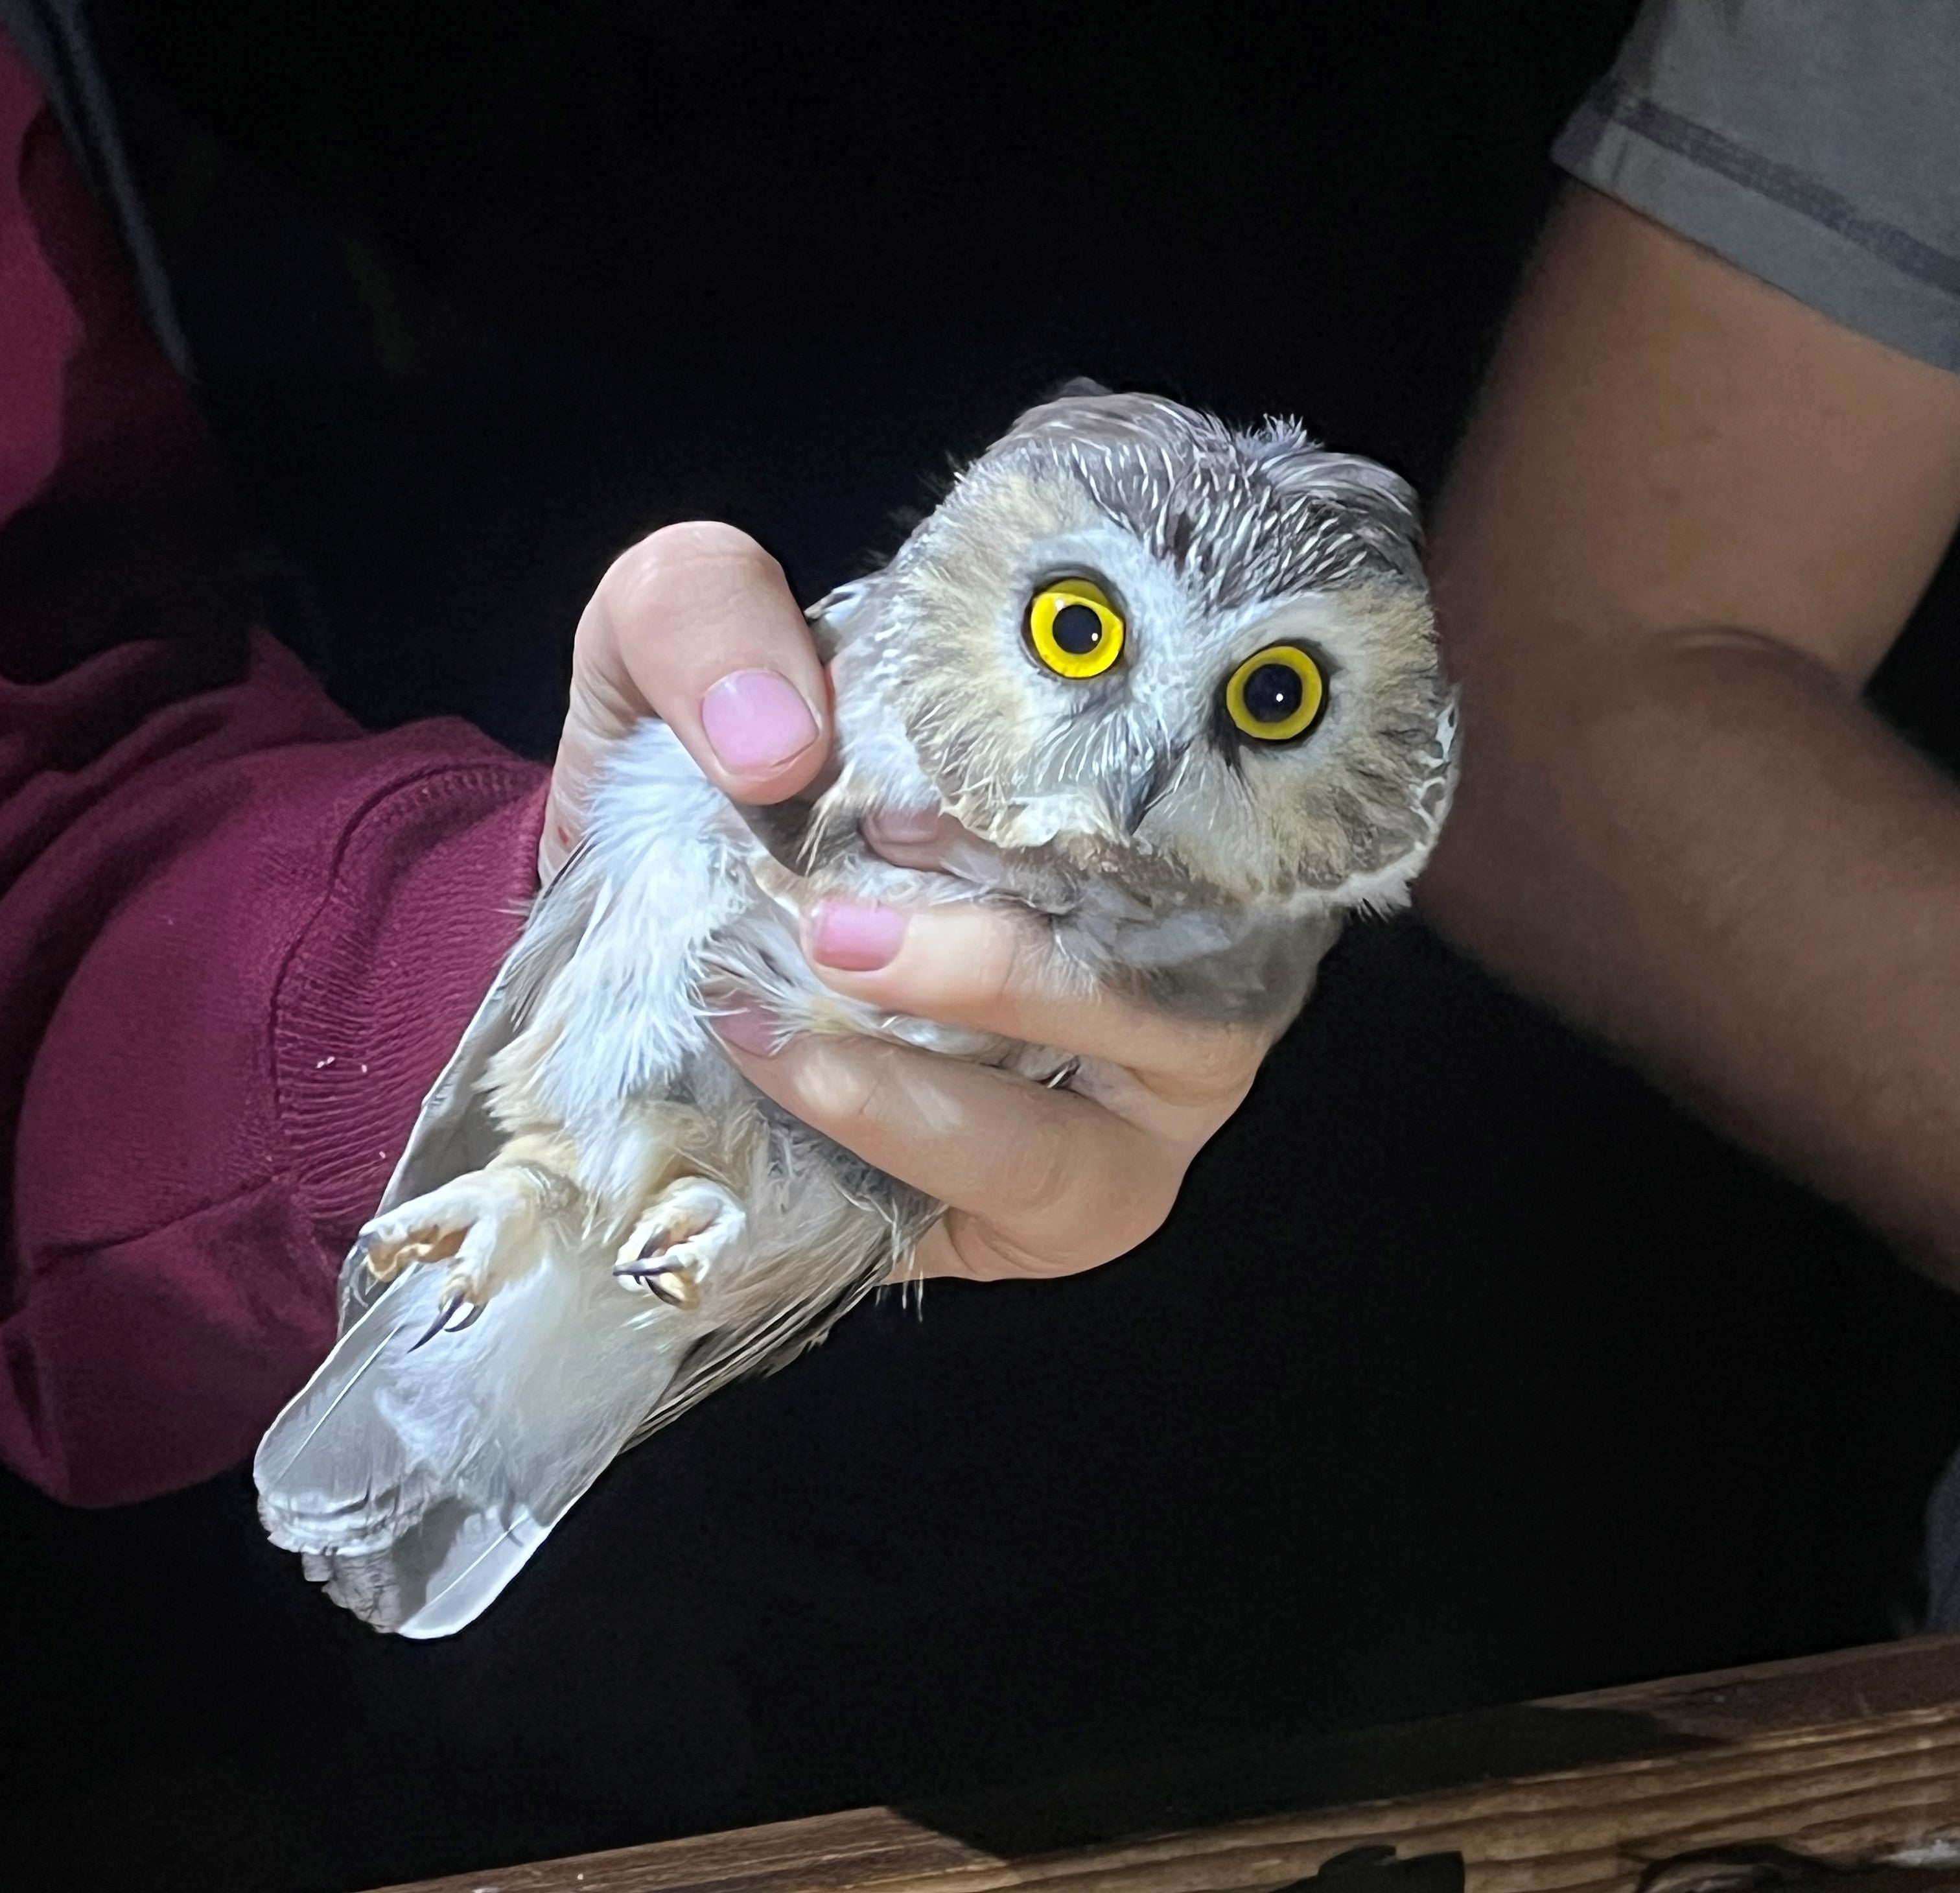 a northern saw-whet owl being held gently by a person wearing wearing a maroon sweatshirt. The owl's huge yellow eyes look toward the camera and you can see its two small, soft feathered feet with sharp talons